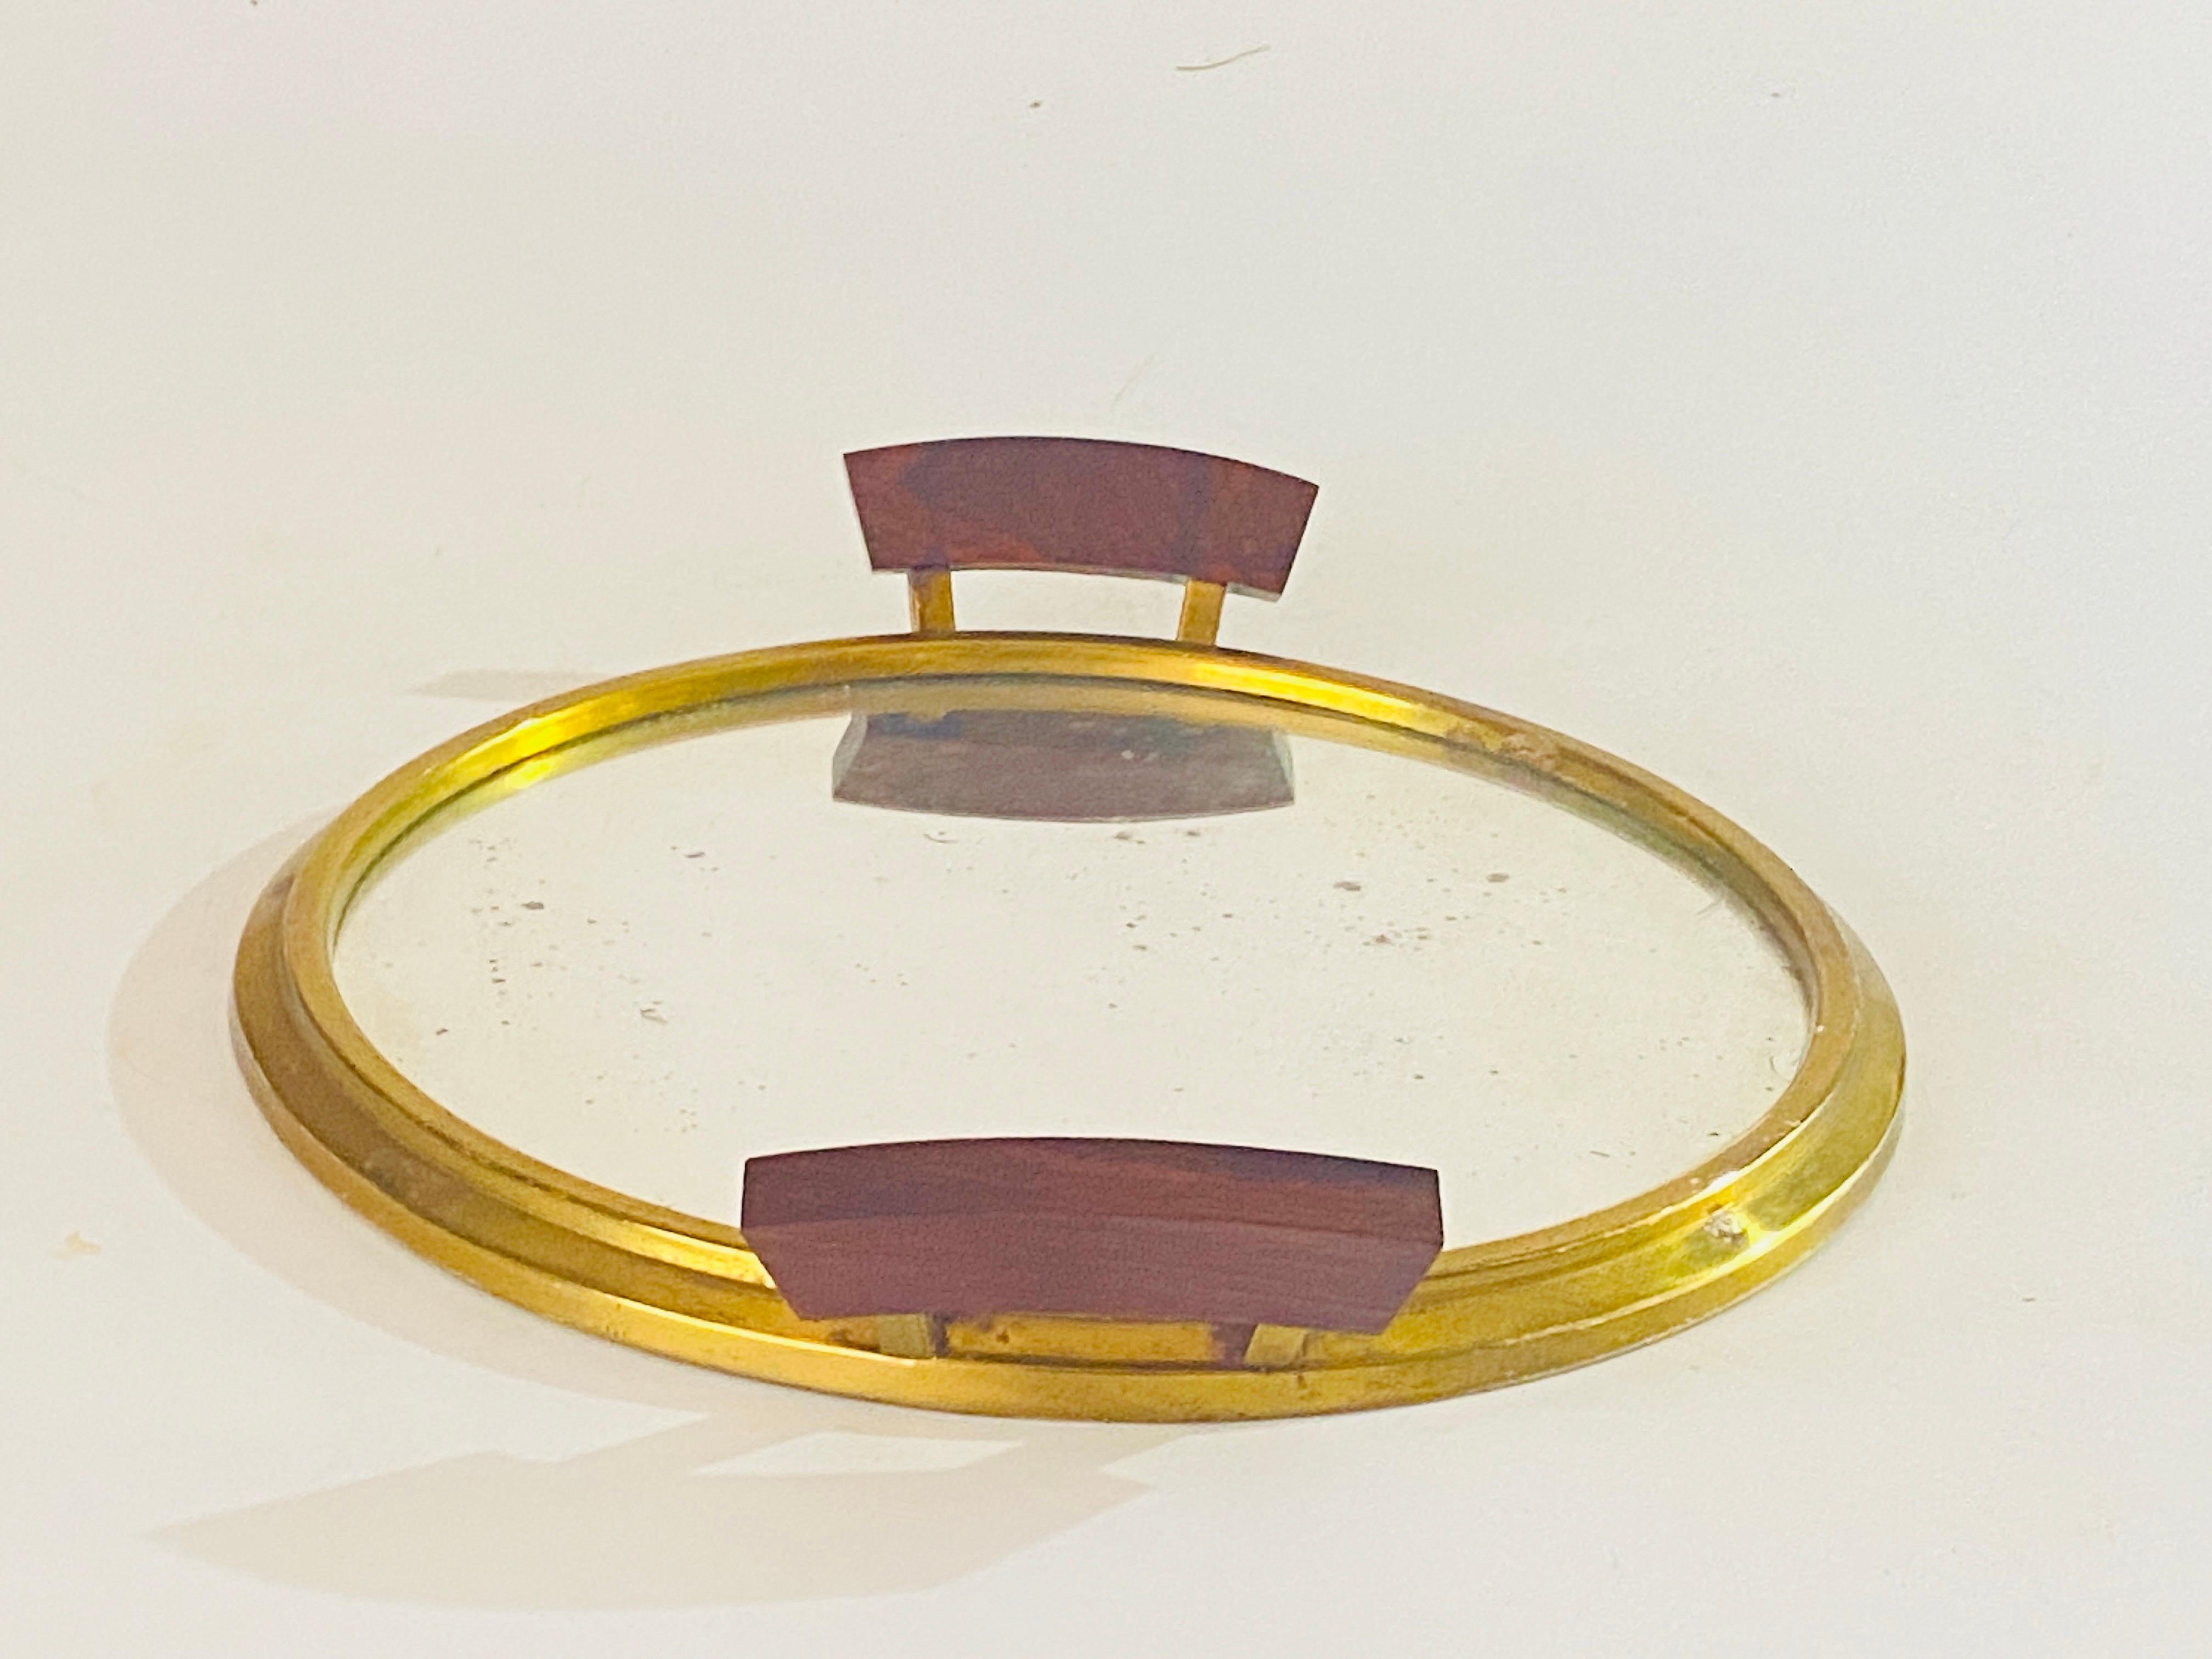 Art Deco Platter Tray Brass and Brown Wood Handles and Mirror, France, 1930 For Sale 11